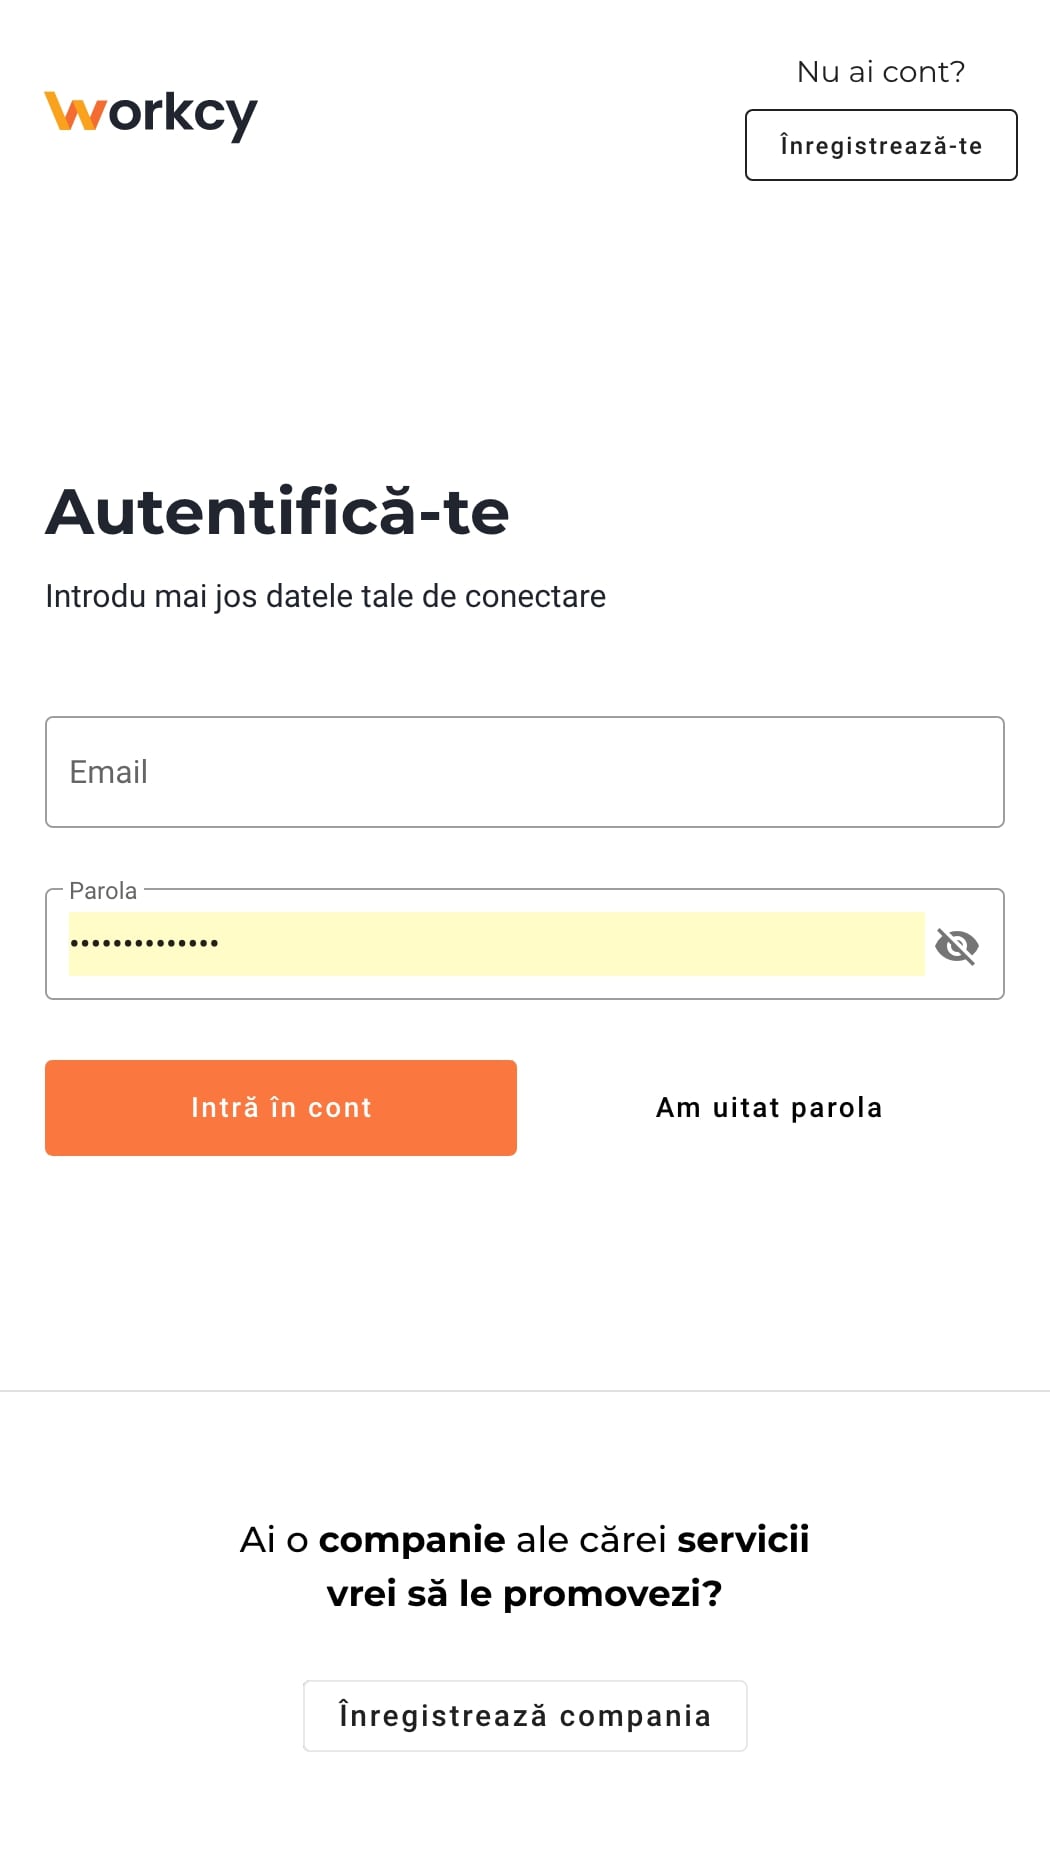 The login page asks for an email address and password. This page is used by both the provider and the beneficiary, being later redirected to the control panel corresponding to each.